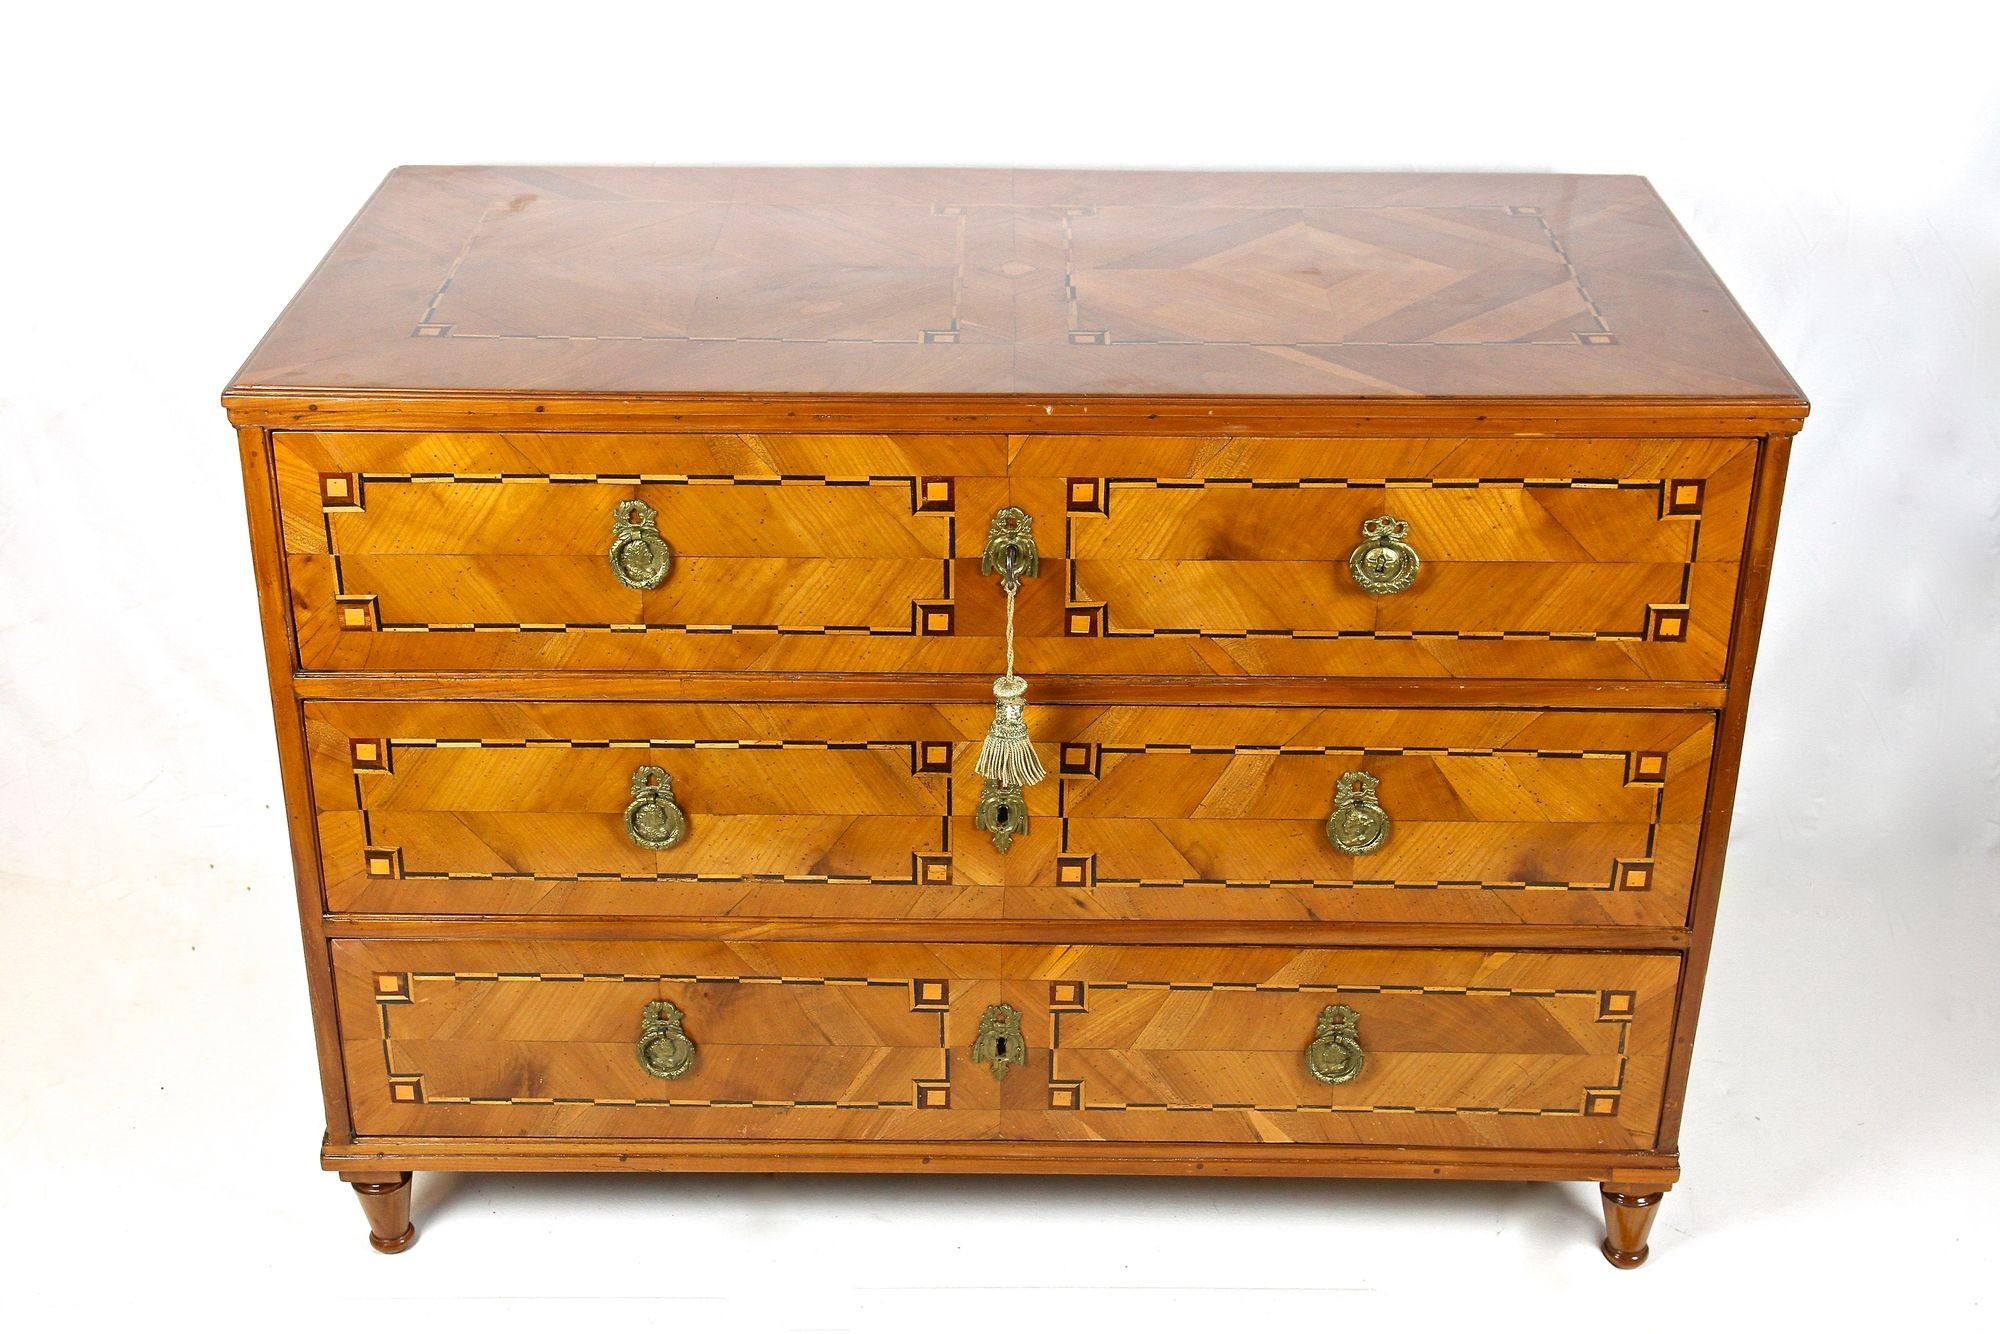 Beautiful cherrywood chest of drawers with inlay works from the late 18th century in Austria around 1790. This over 230 year old commode from the so-called 